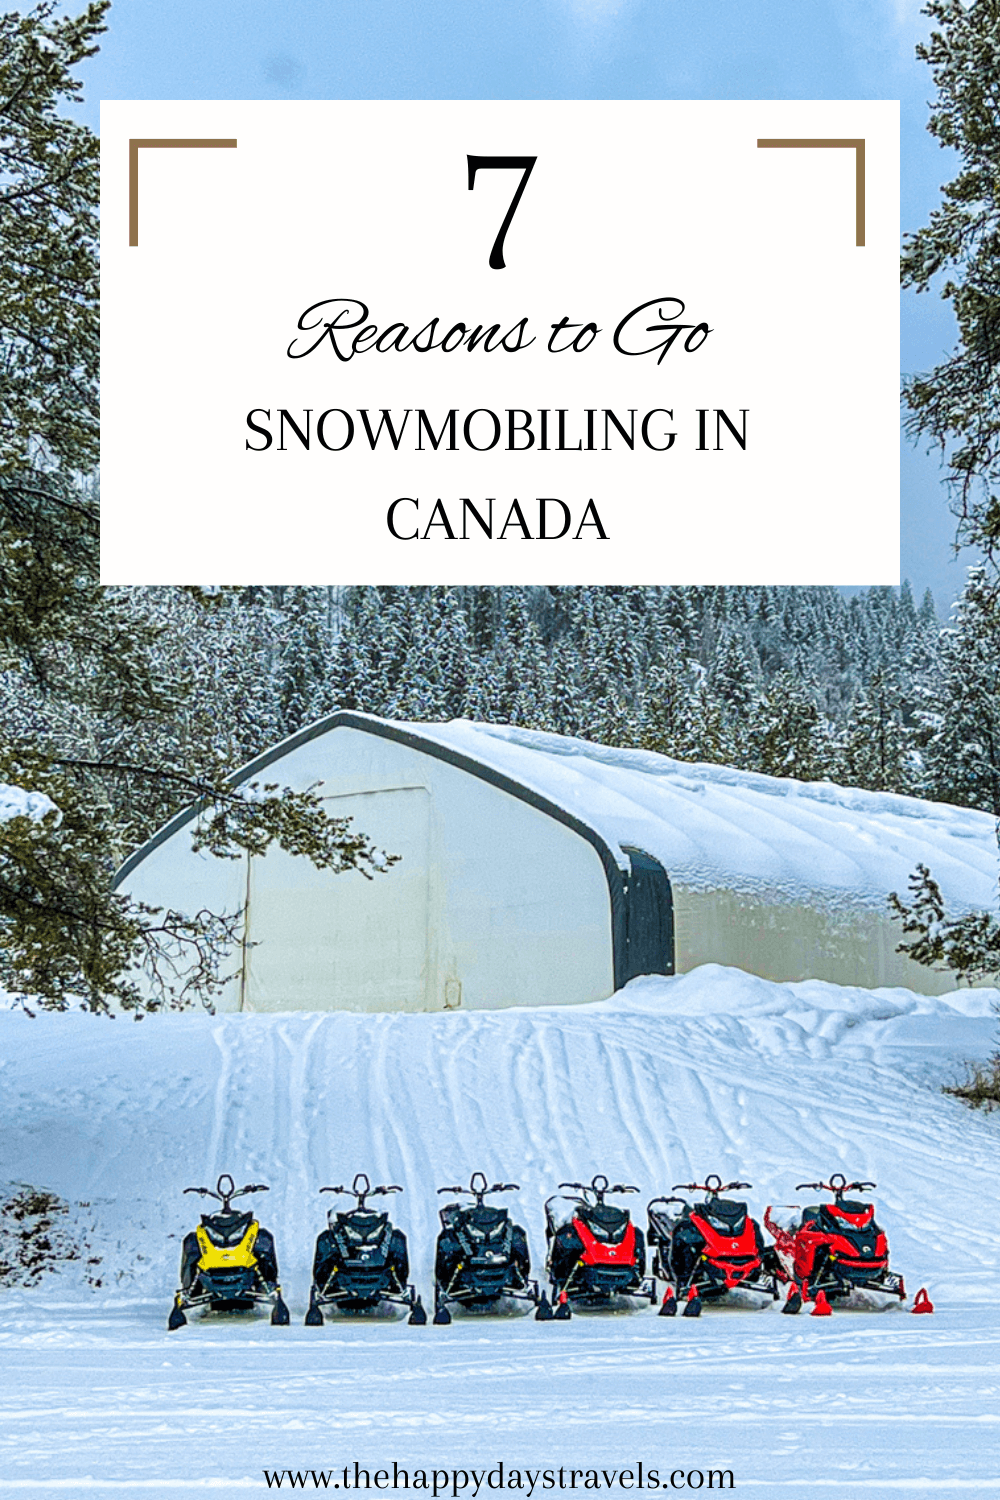 pin image: text reads '7 reasons to go Snowmobiling in Canada' on white rectangle at top of image. Background image is of 6 snowmobiles parked next to eachother on snow with trees in background